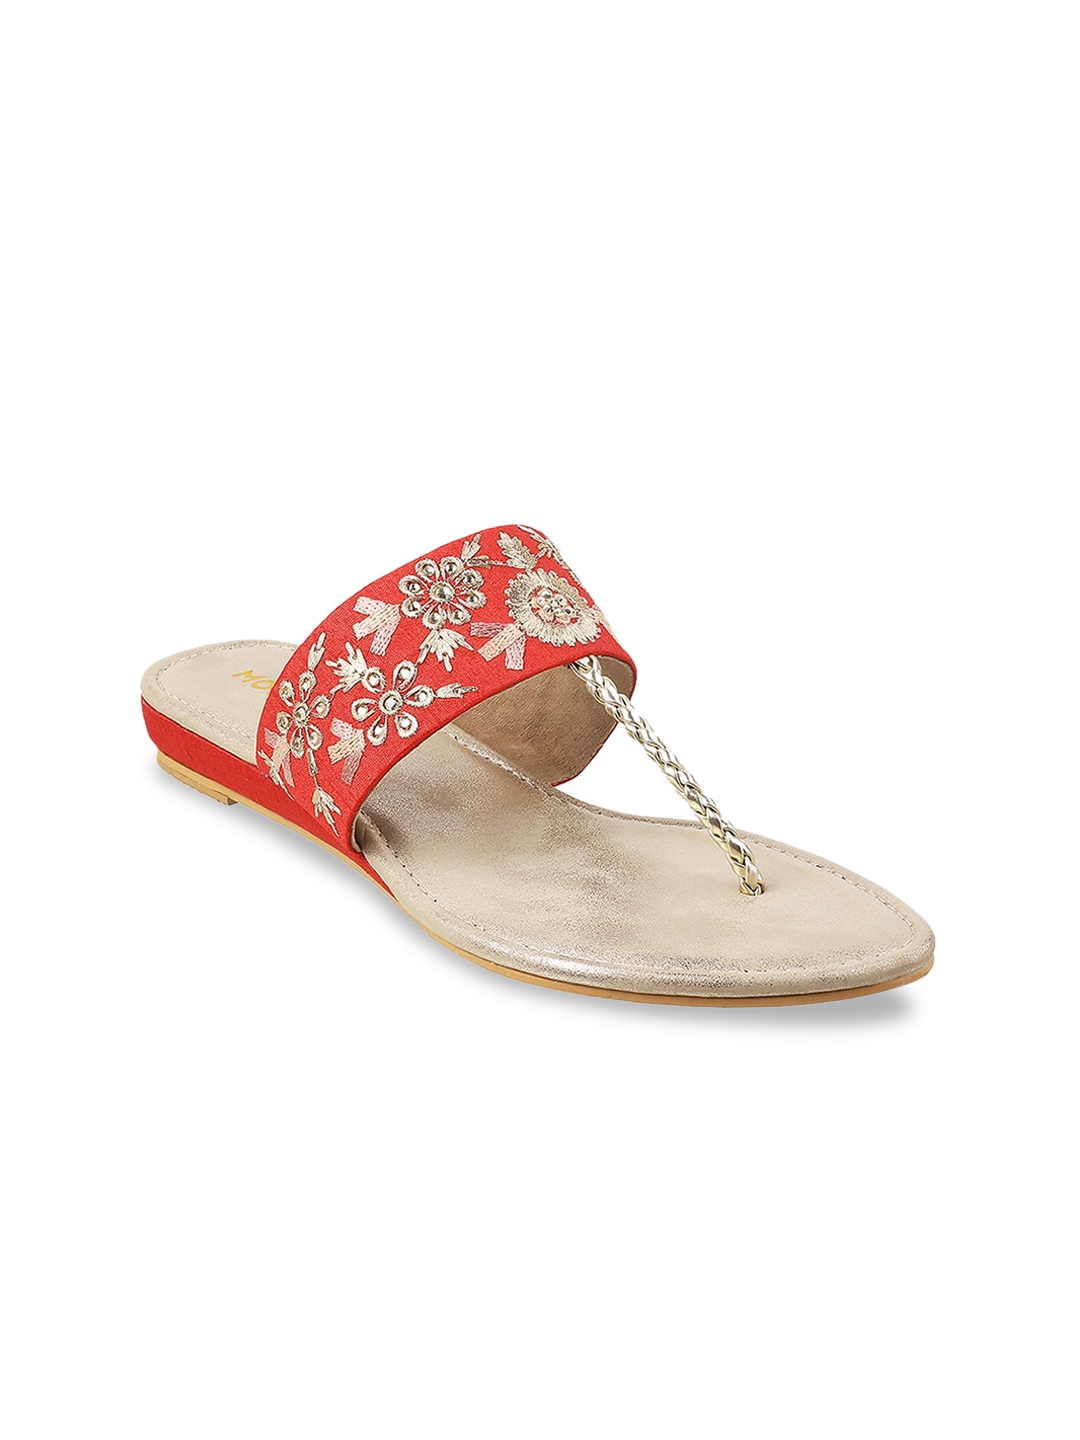 Mochi Woman Red Embellished T Strap Flats